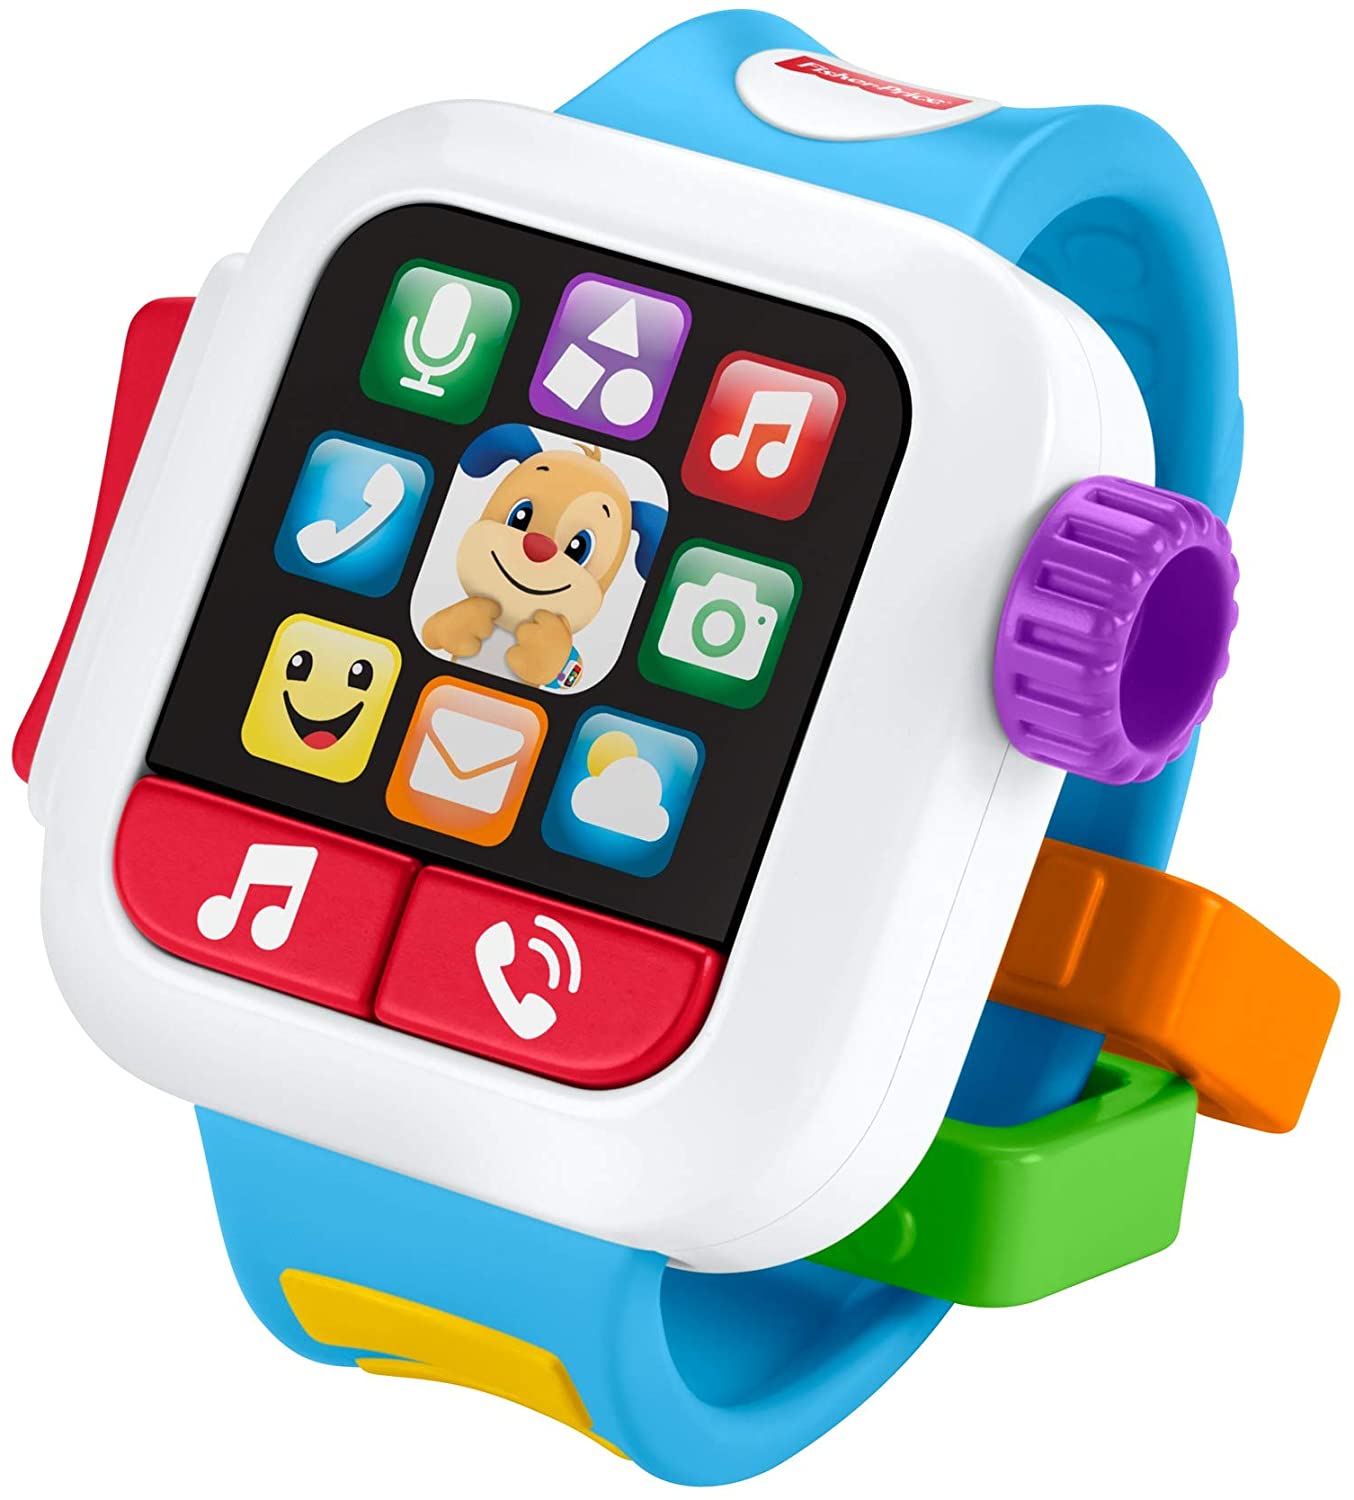 Fisher-Price GJW17 Laugh & Learn Time to Learn Smartwatch $6.71